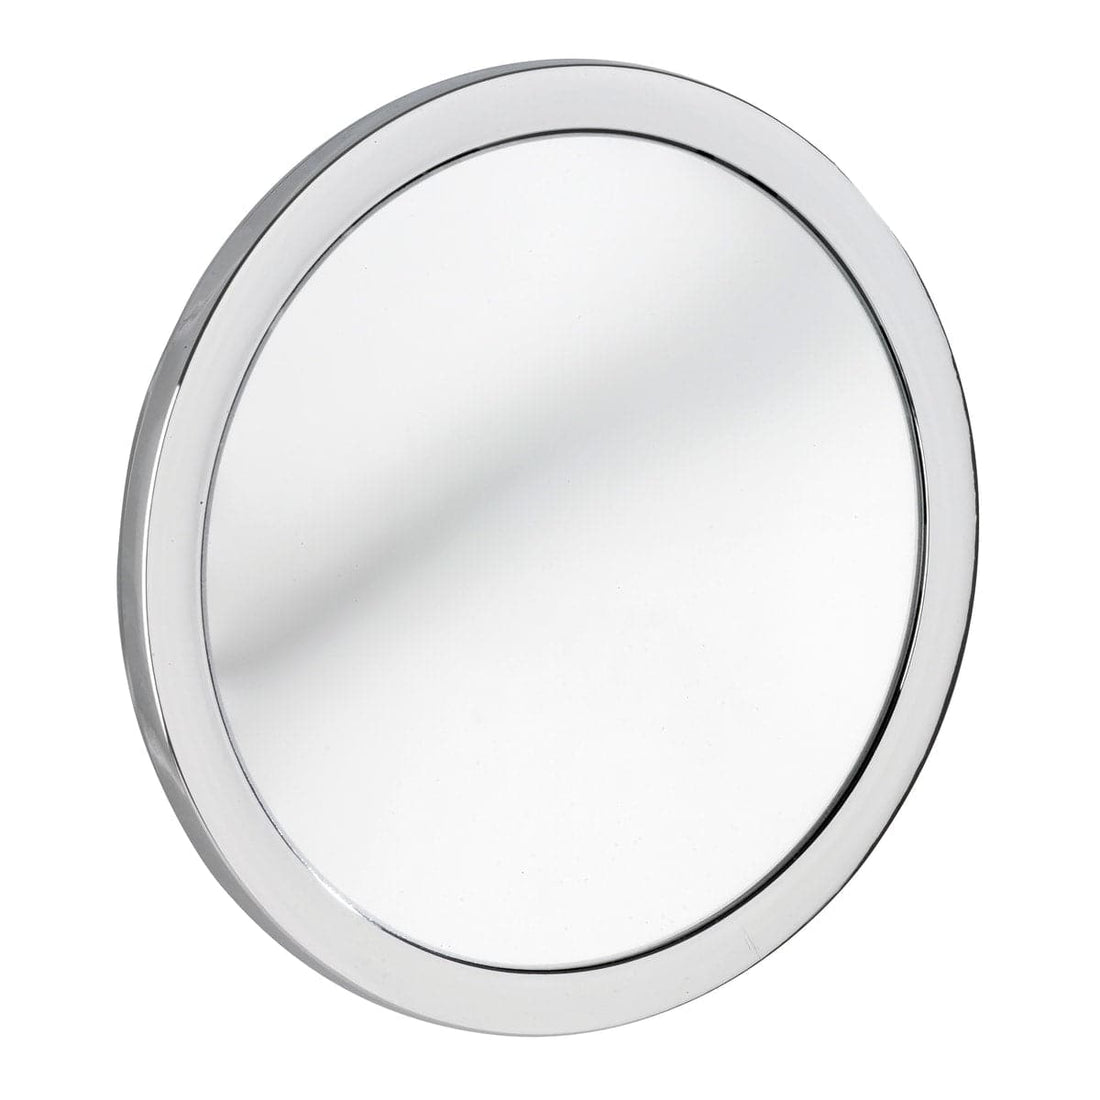 3-FOLD MAGNIFYING MIRROR WITH SUCTION CUP - best price from Maltashopper.com BR430460280